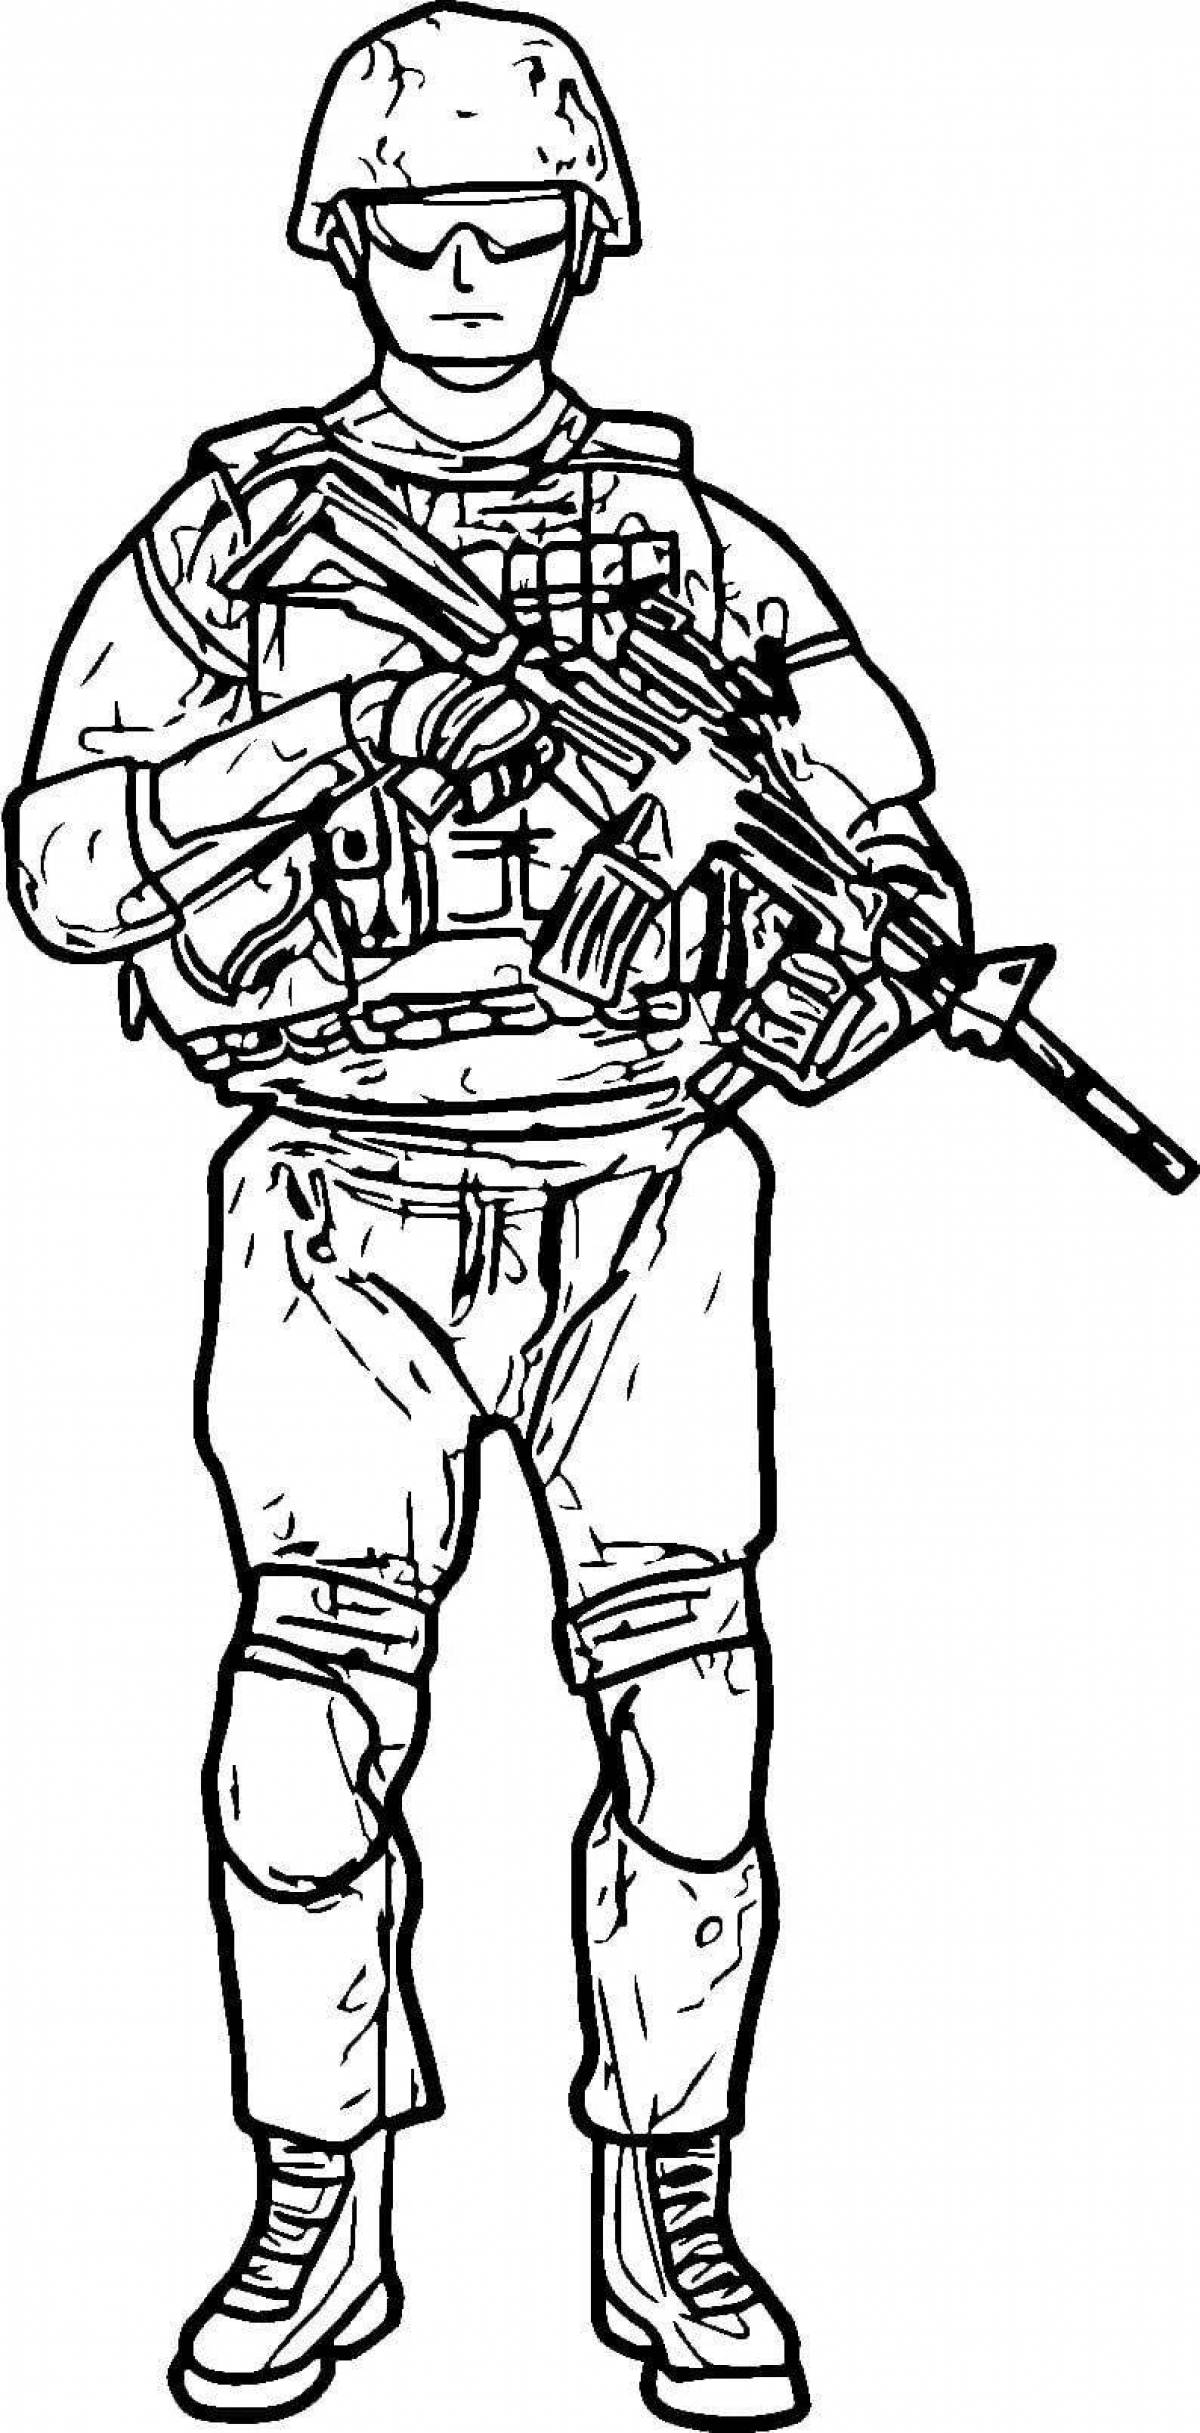 Coloring book strikingly regal Russian soldier